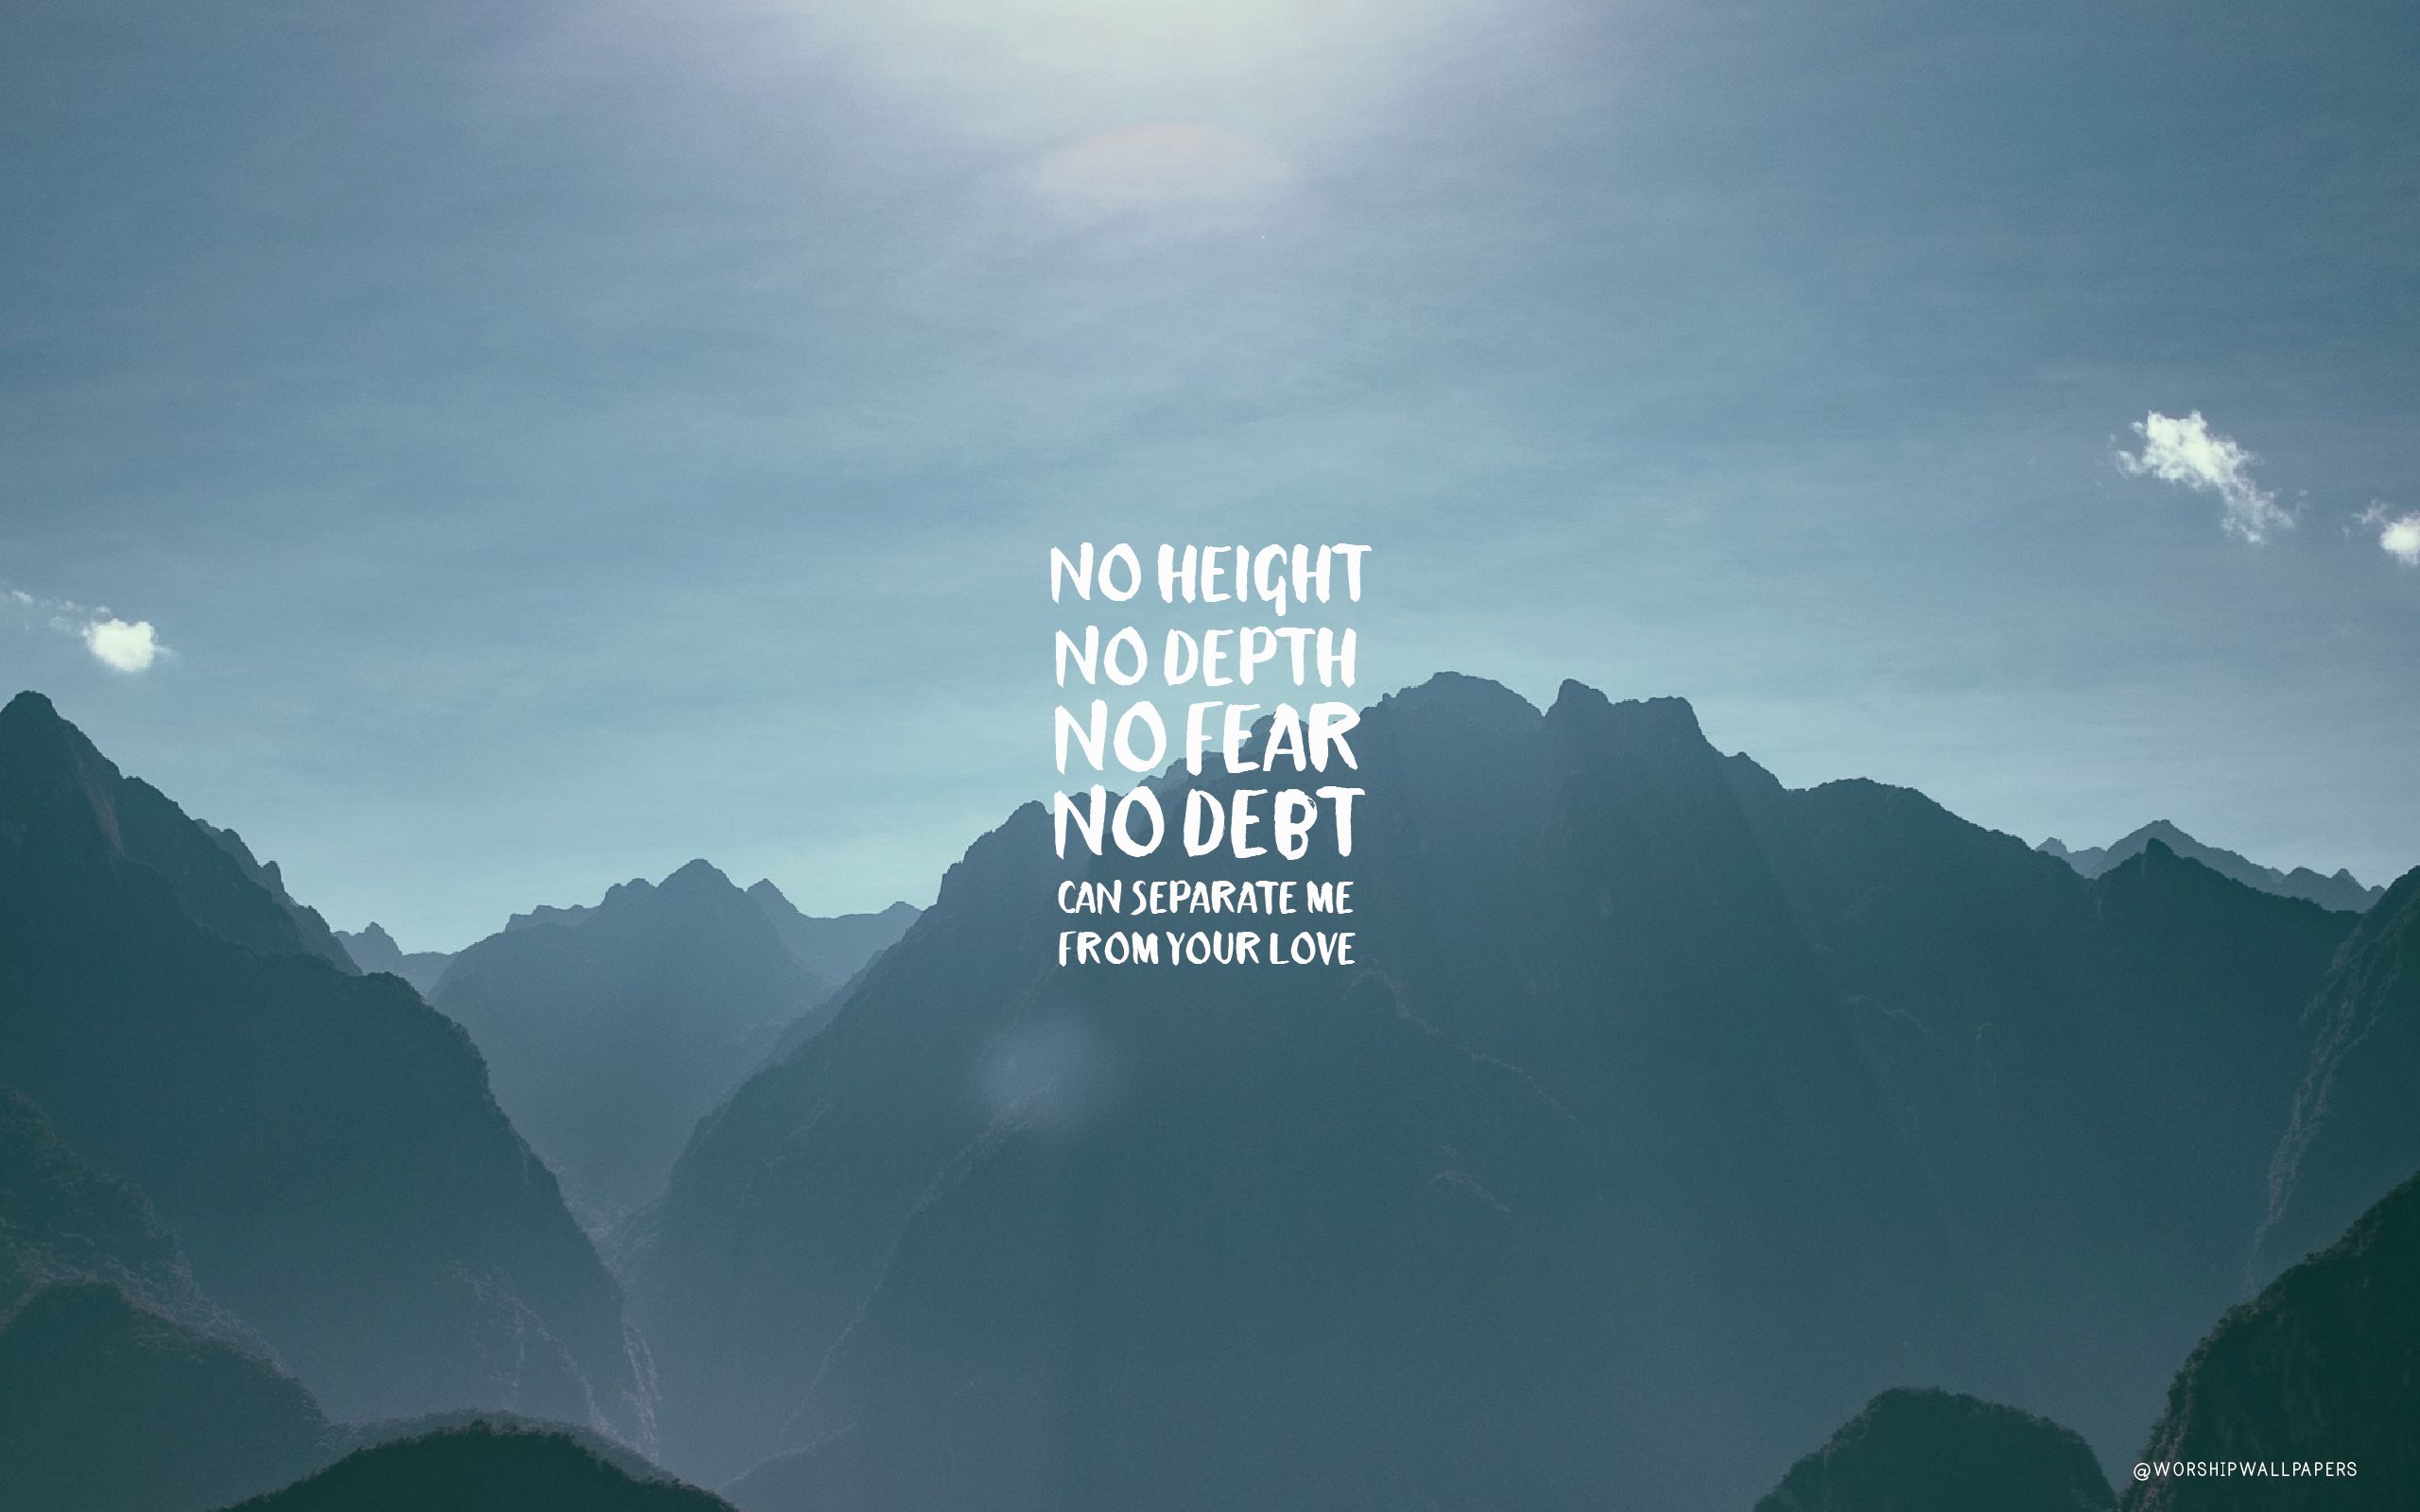 A beautiful quote wallpaper with a mountain background. - Jesus